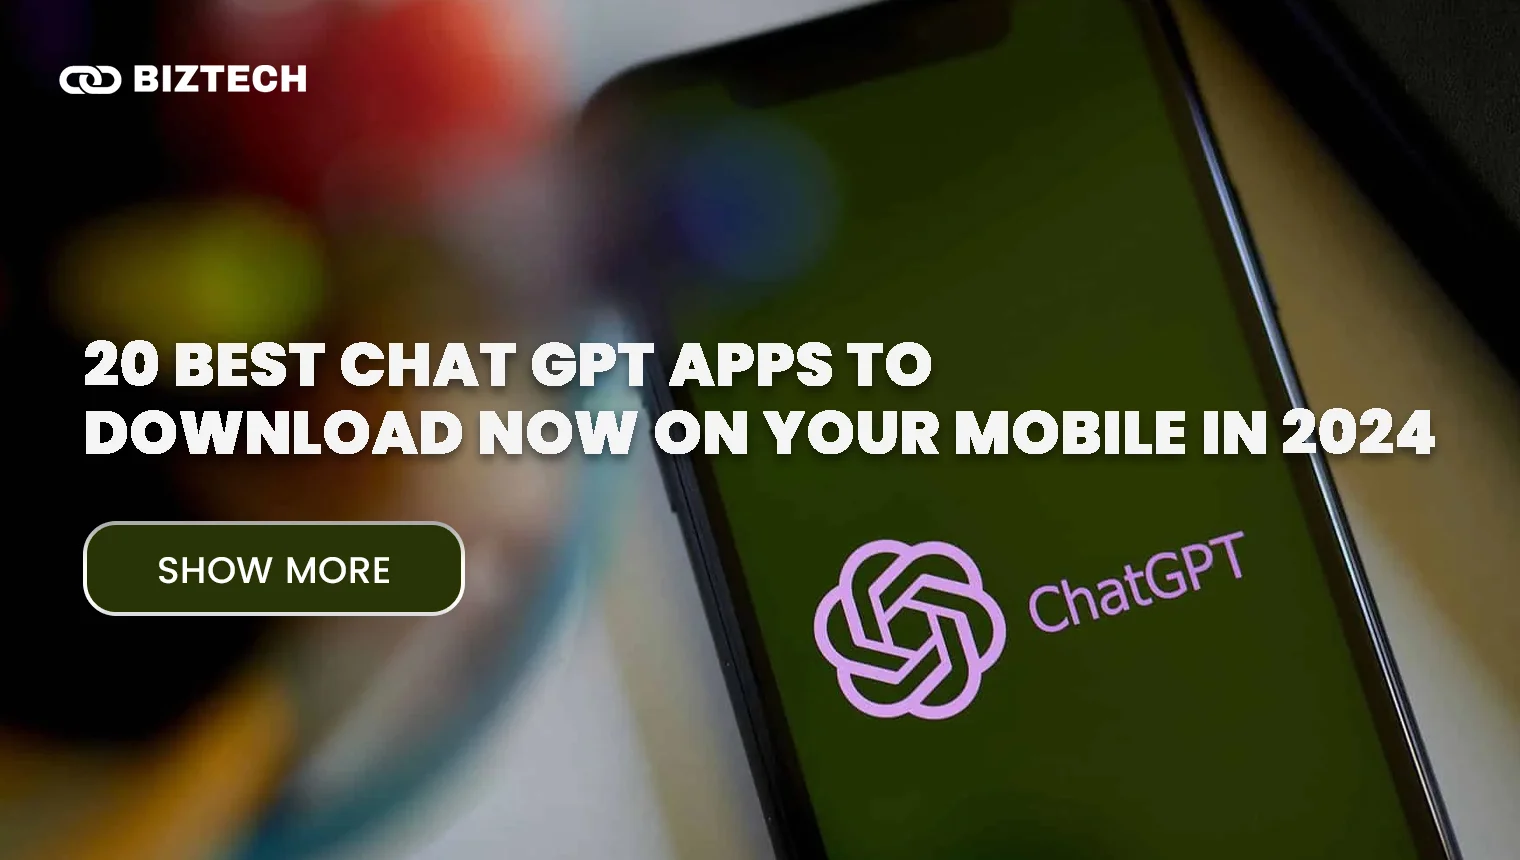 20 Best Chat GPT Apps to Download on Your iPhone or Android Device: What Are Their Uses and Latest 2024 Pricing Plan